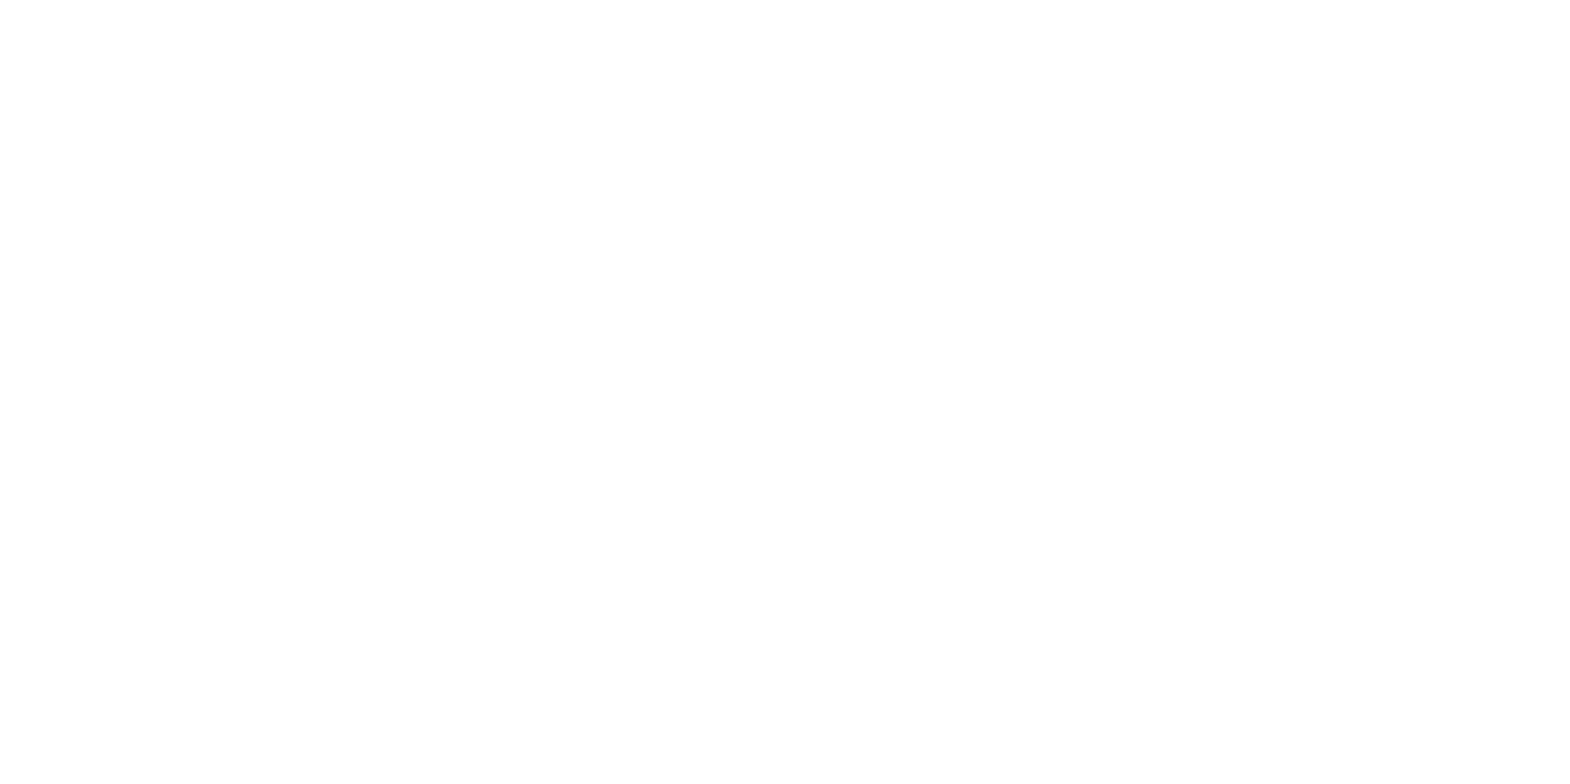 Coke Consolidated